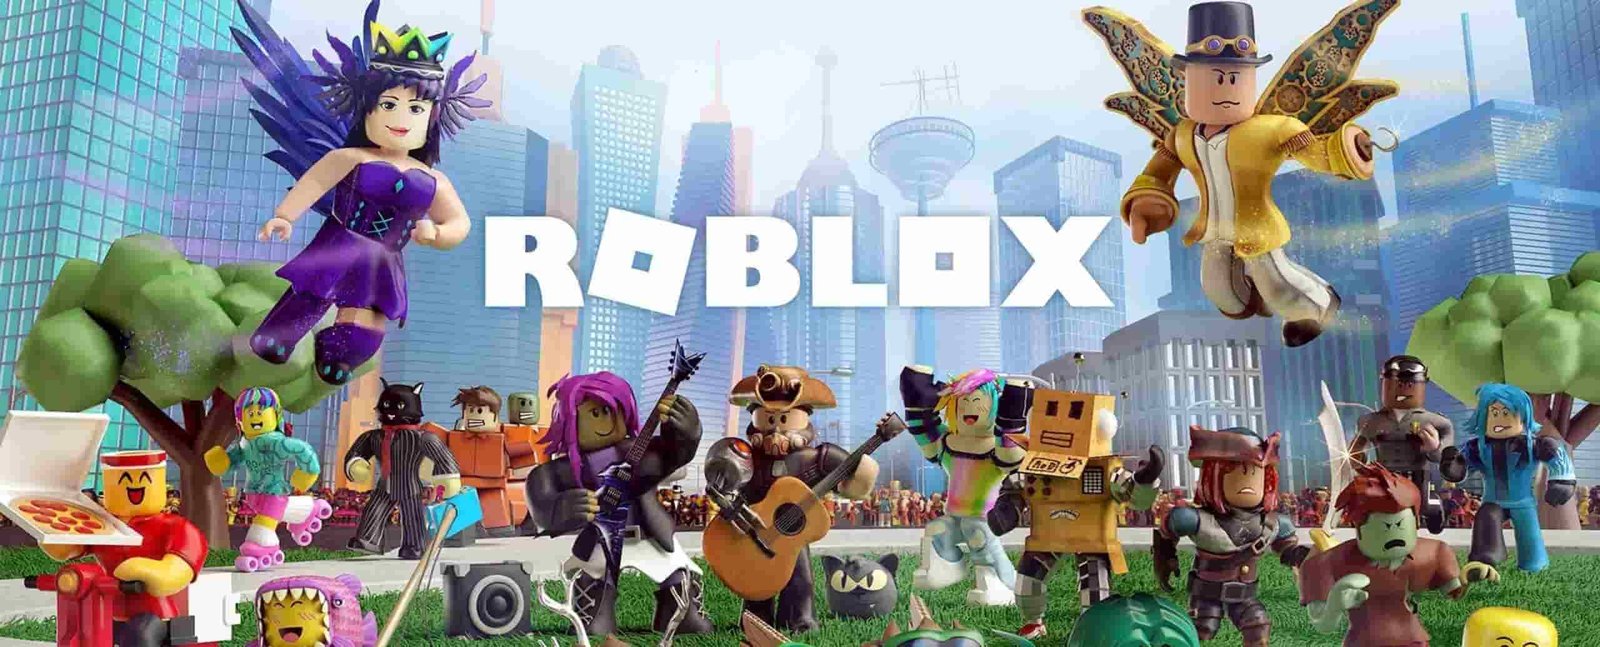 Roblox Voice Chat Feature Might Only Work For 18 Users Suggests Code Digistatement - how to voice chat on roblox pc